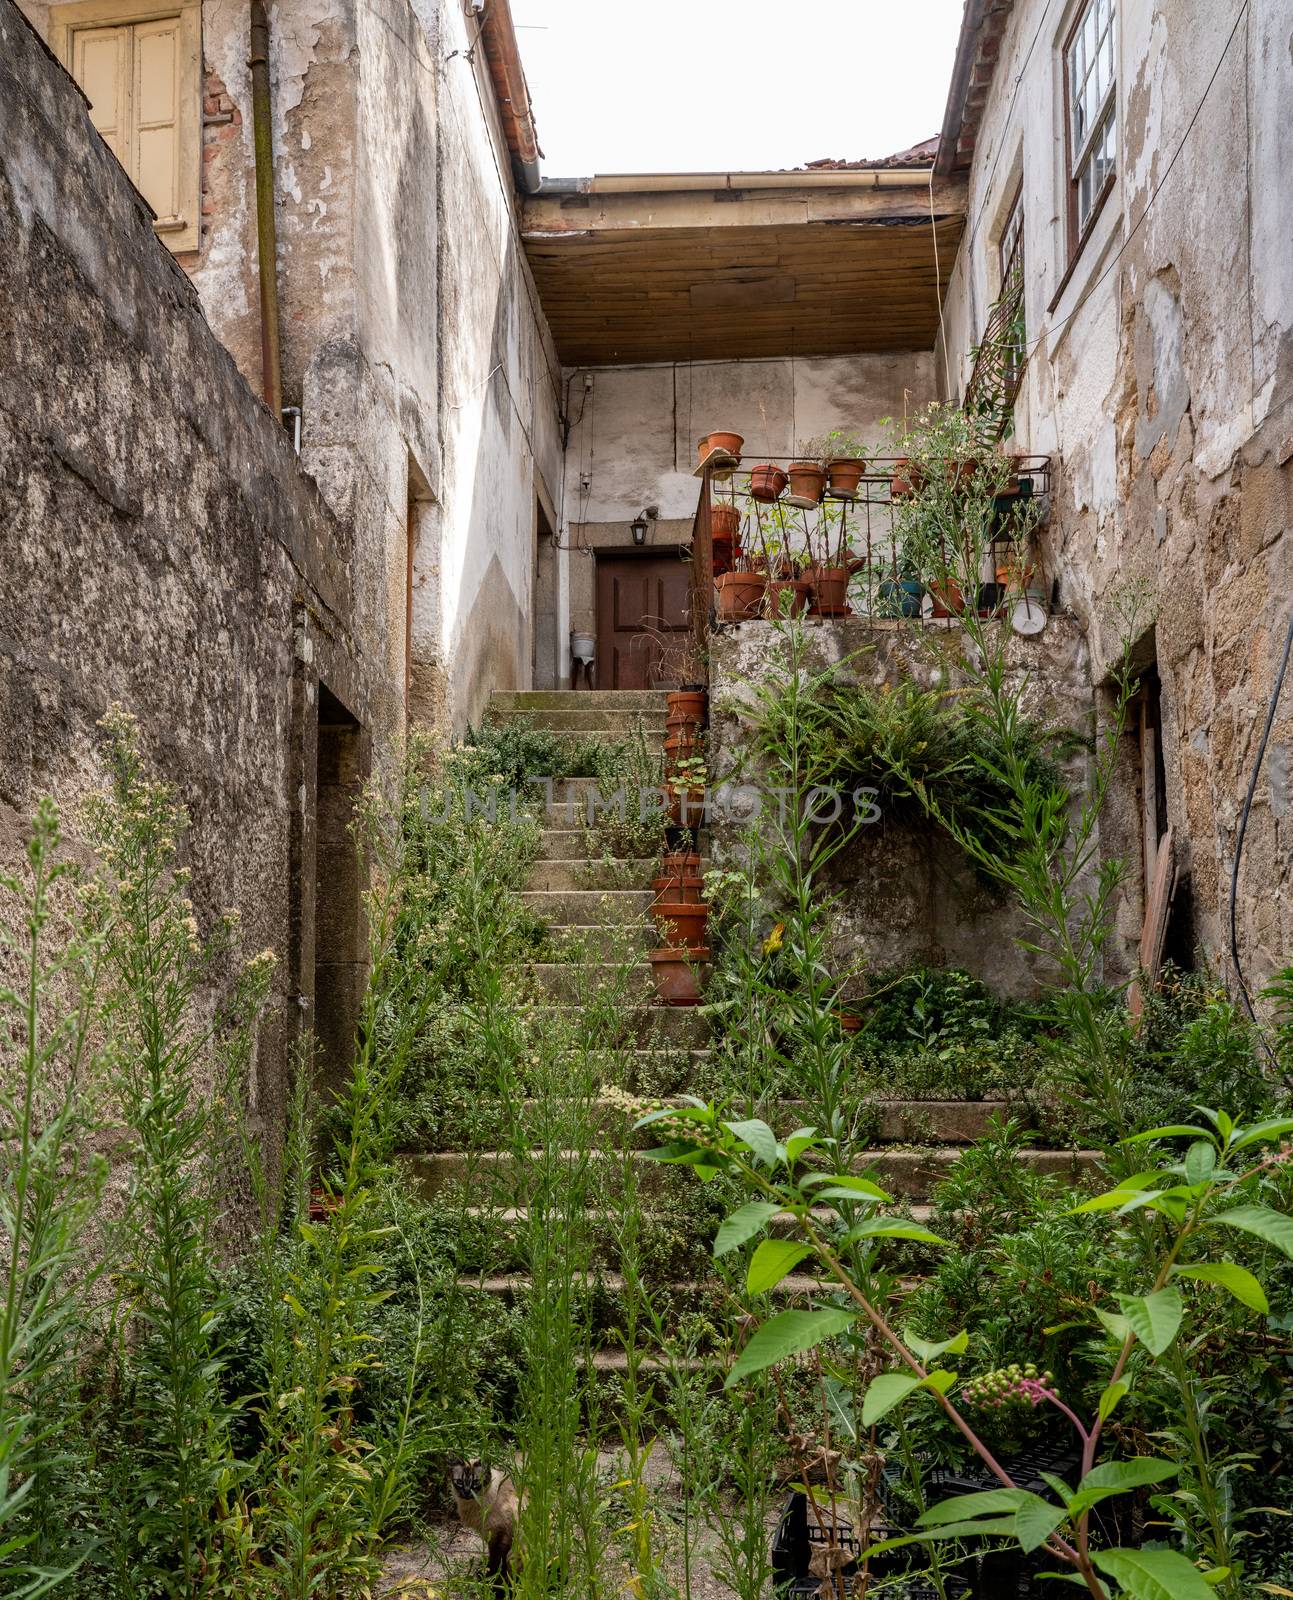 Overgrown garden and yard with steps to front door in Viseu Portugal by steheap